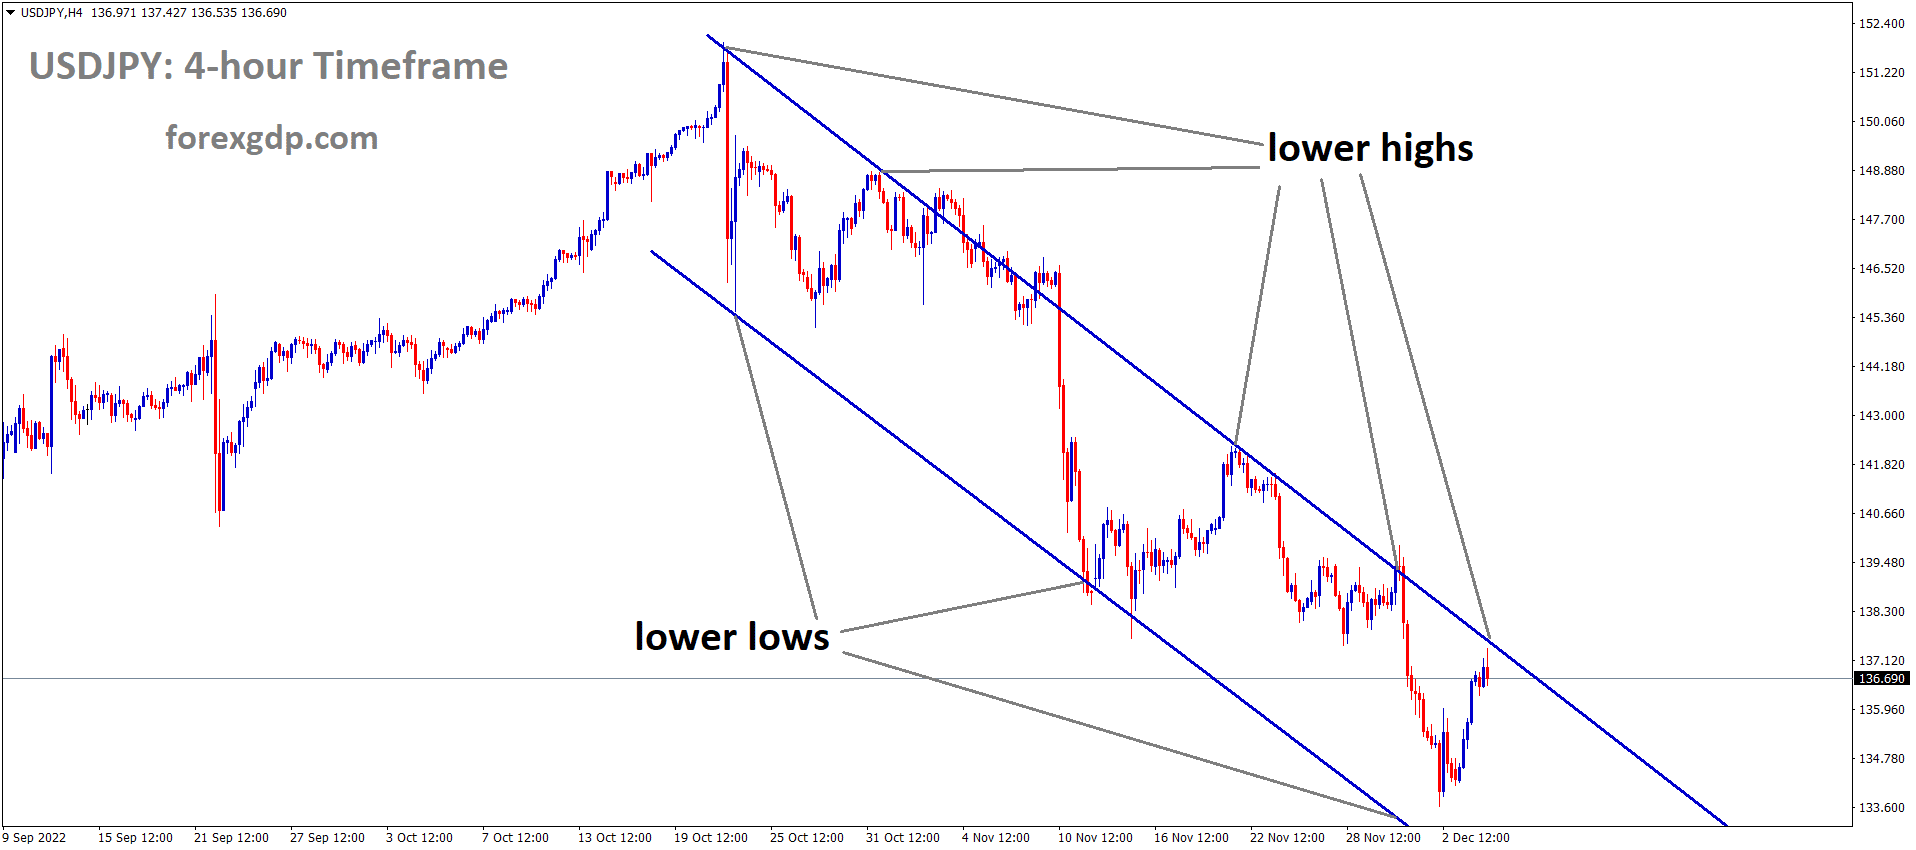 USDJPY is moving in the Descending channel and the market has reached the lower high area of the channel